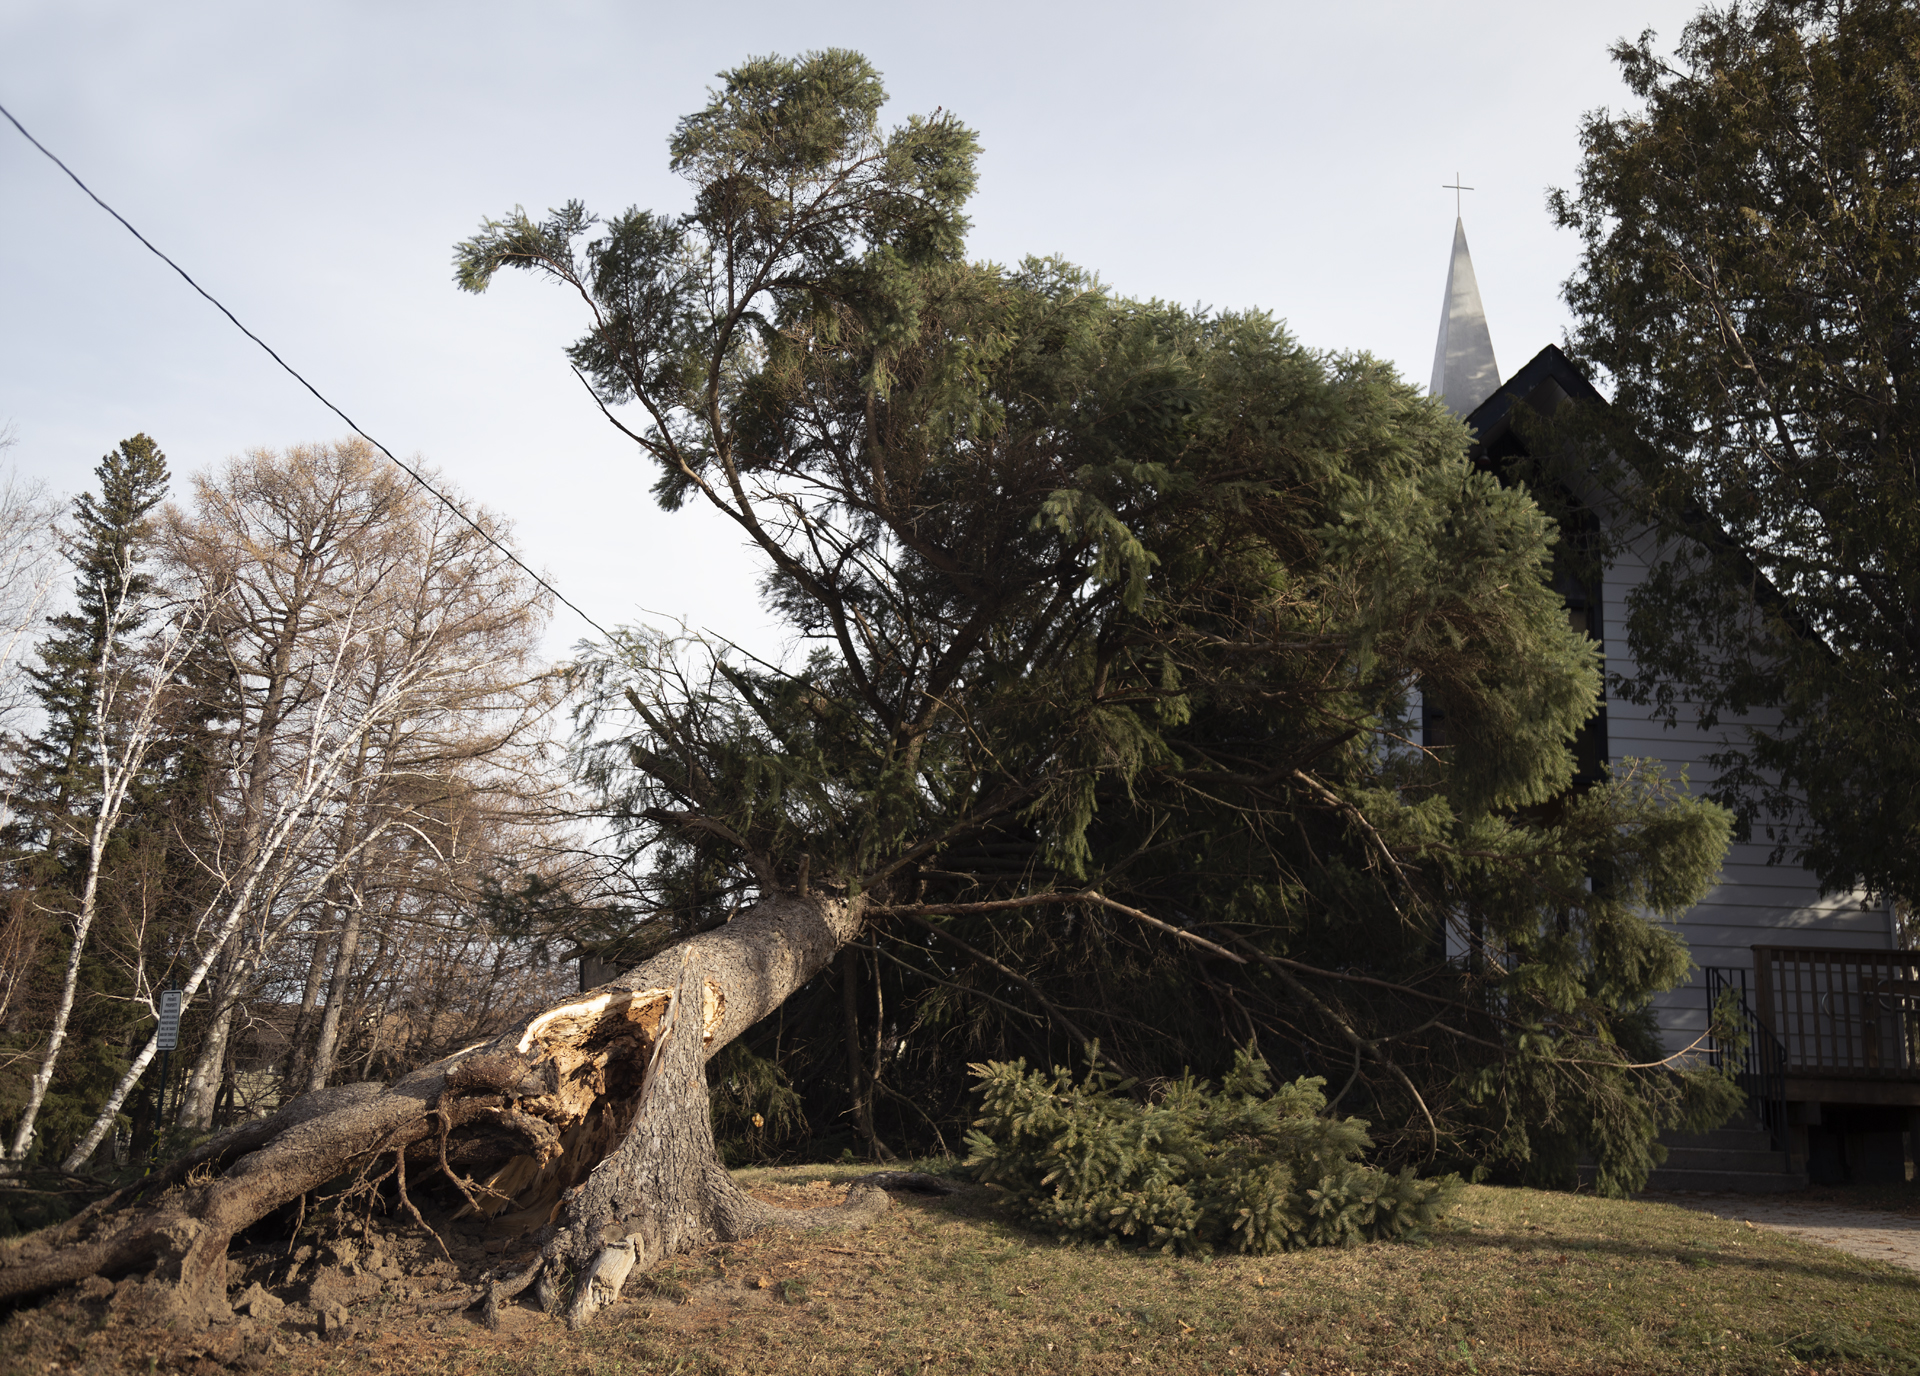 When a Tree Falls: A large pine tree fallen over on top of a church